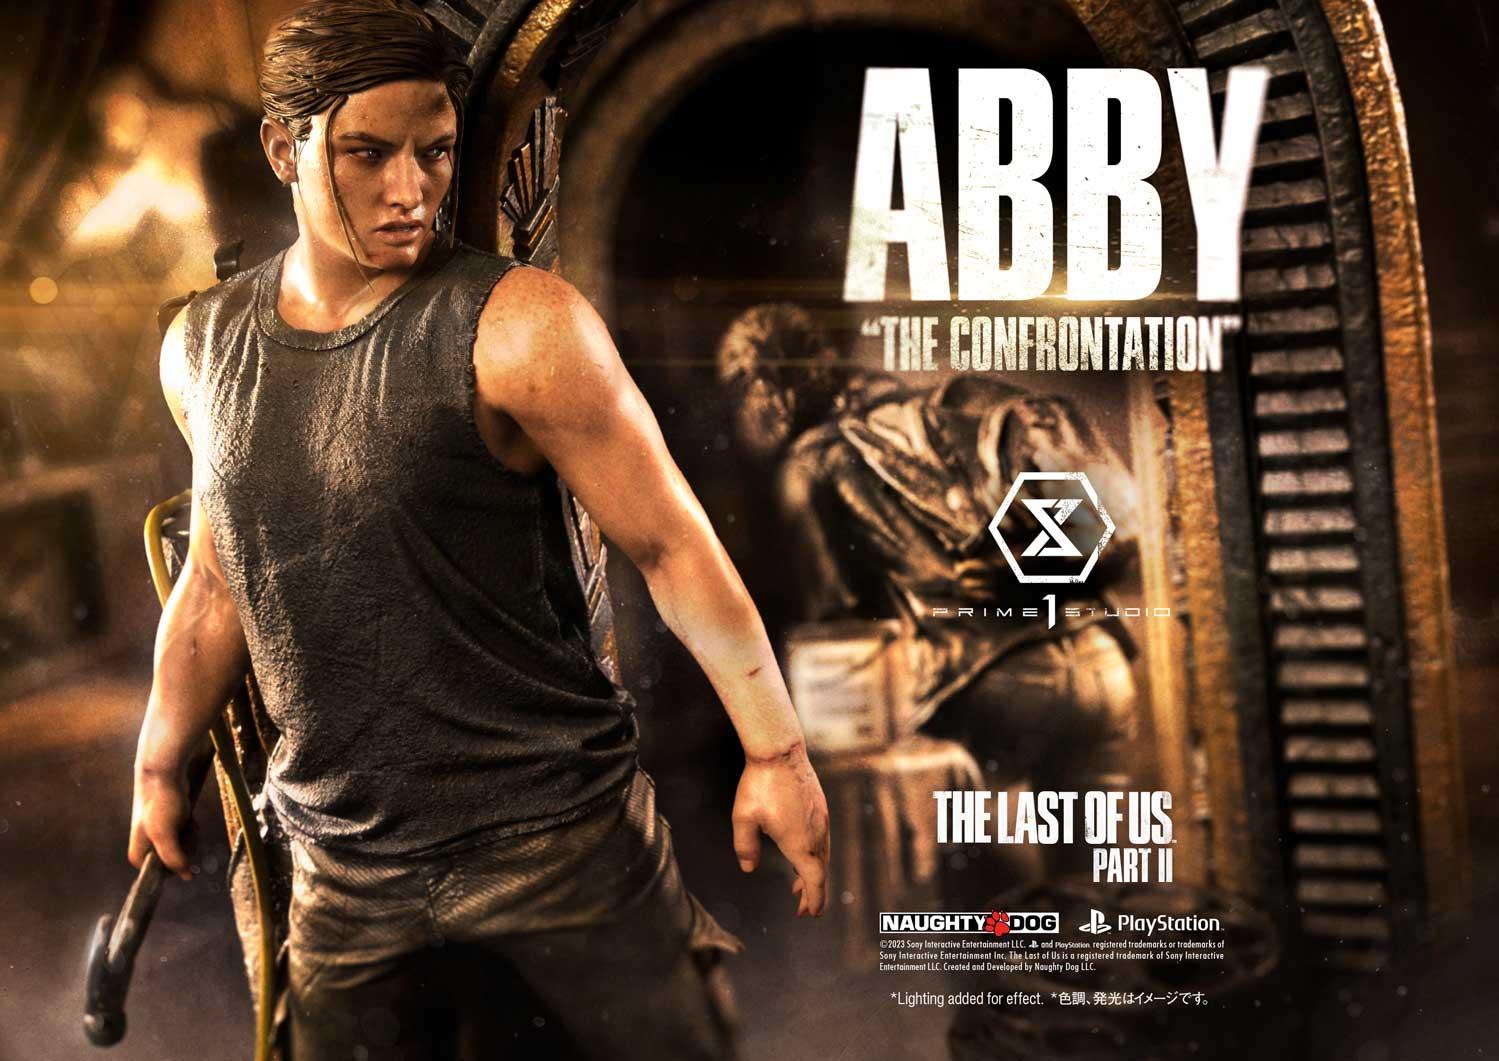 Ultimate Premium Masterline The Last of Us Part II AbbyThe Confrontation